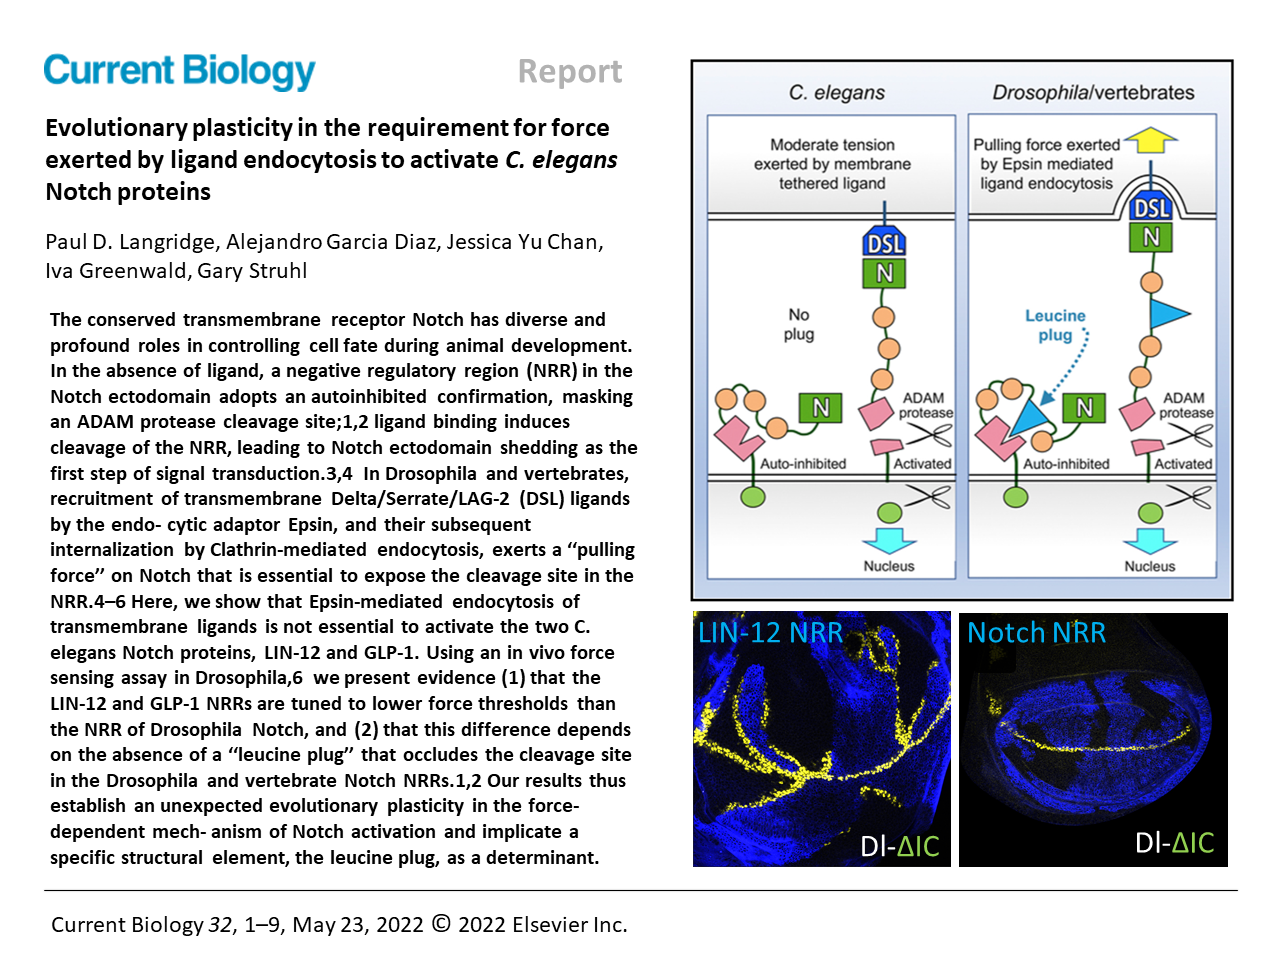 Current Biology
Evolutionary plasticity in the requirement for force exerted by ligand endocytosis to activate C. elegans Notch proteins